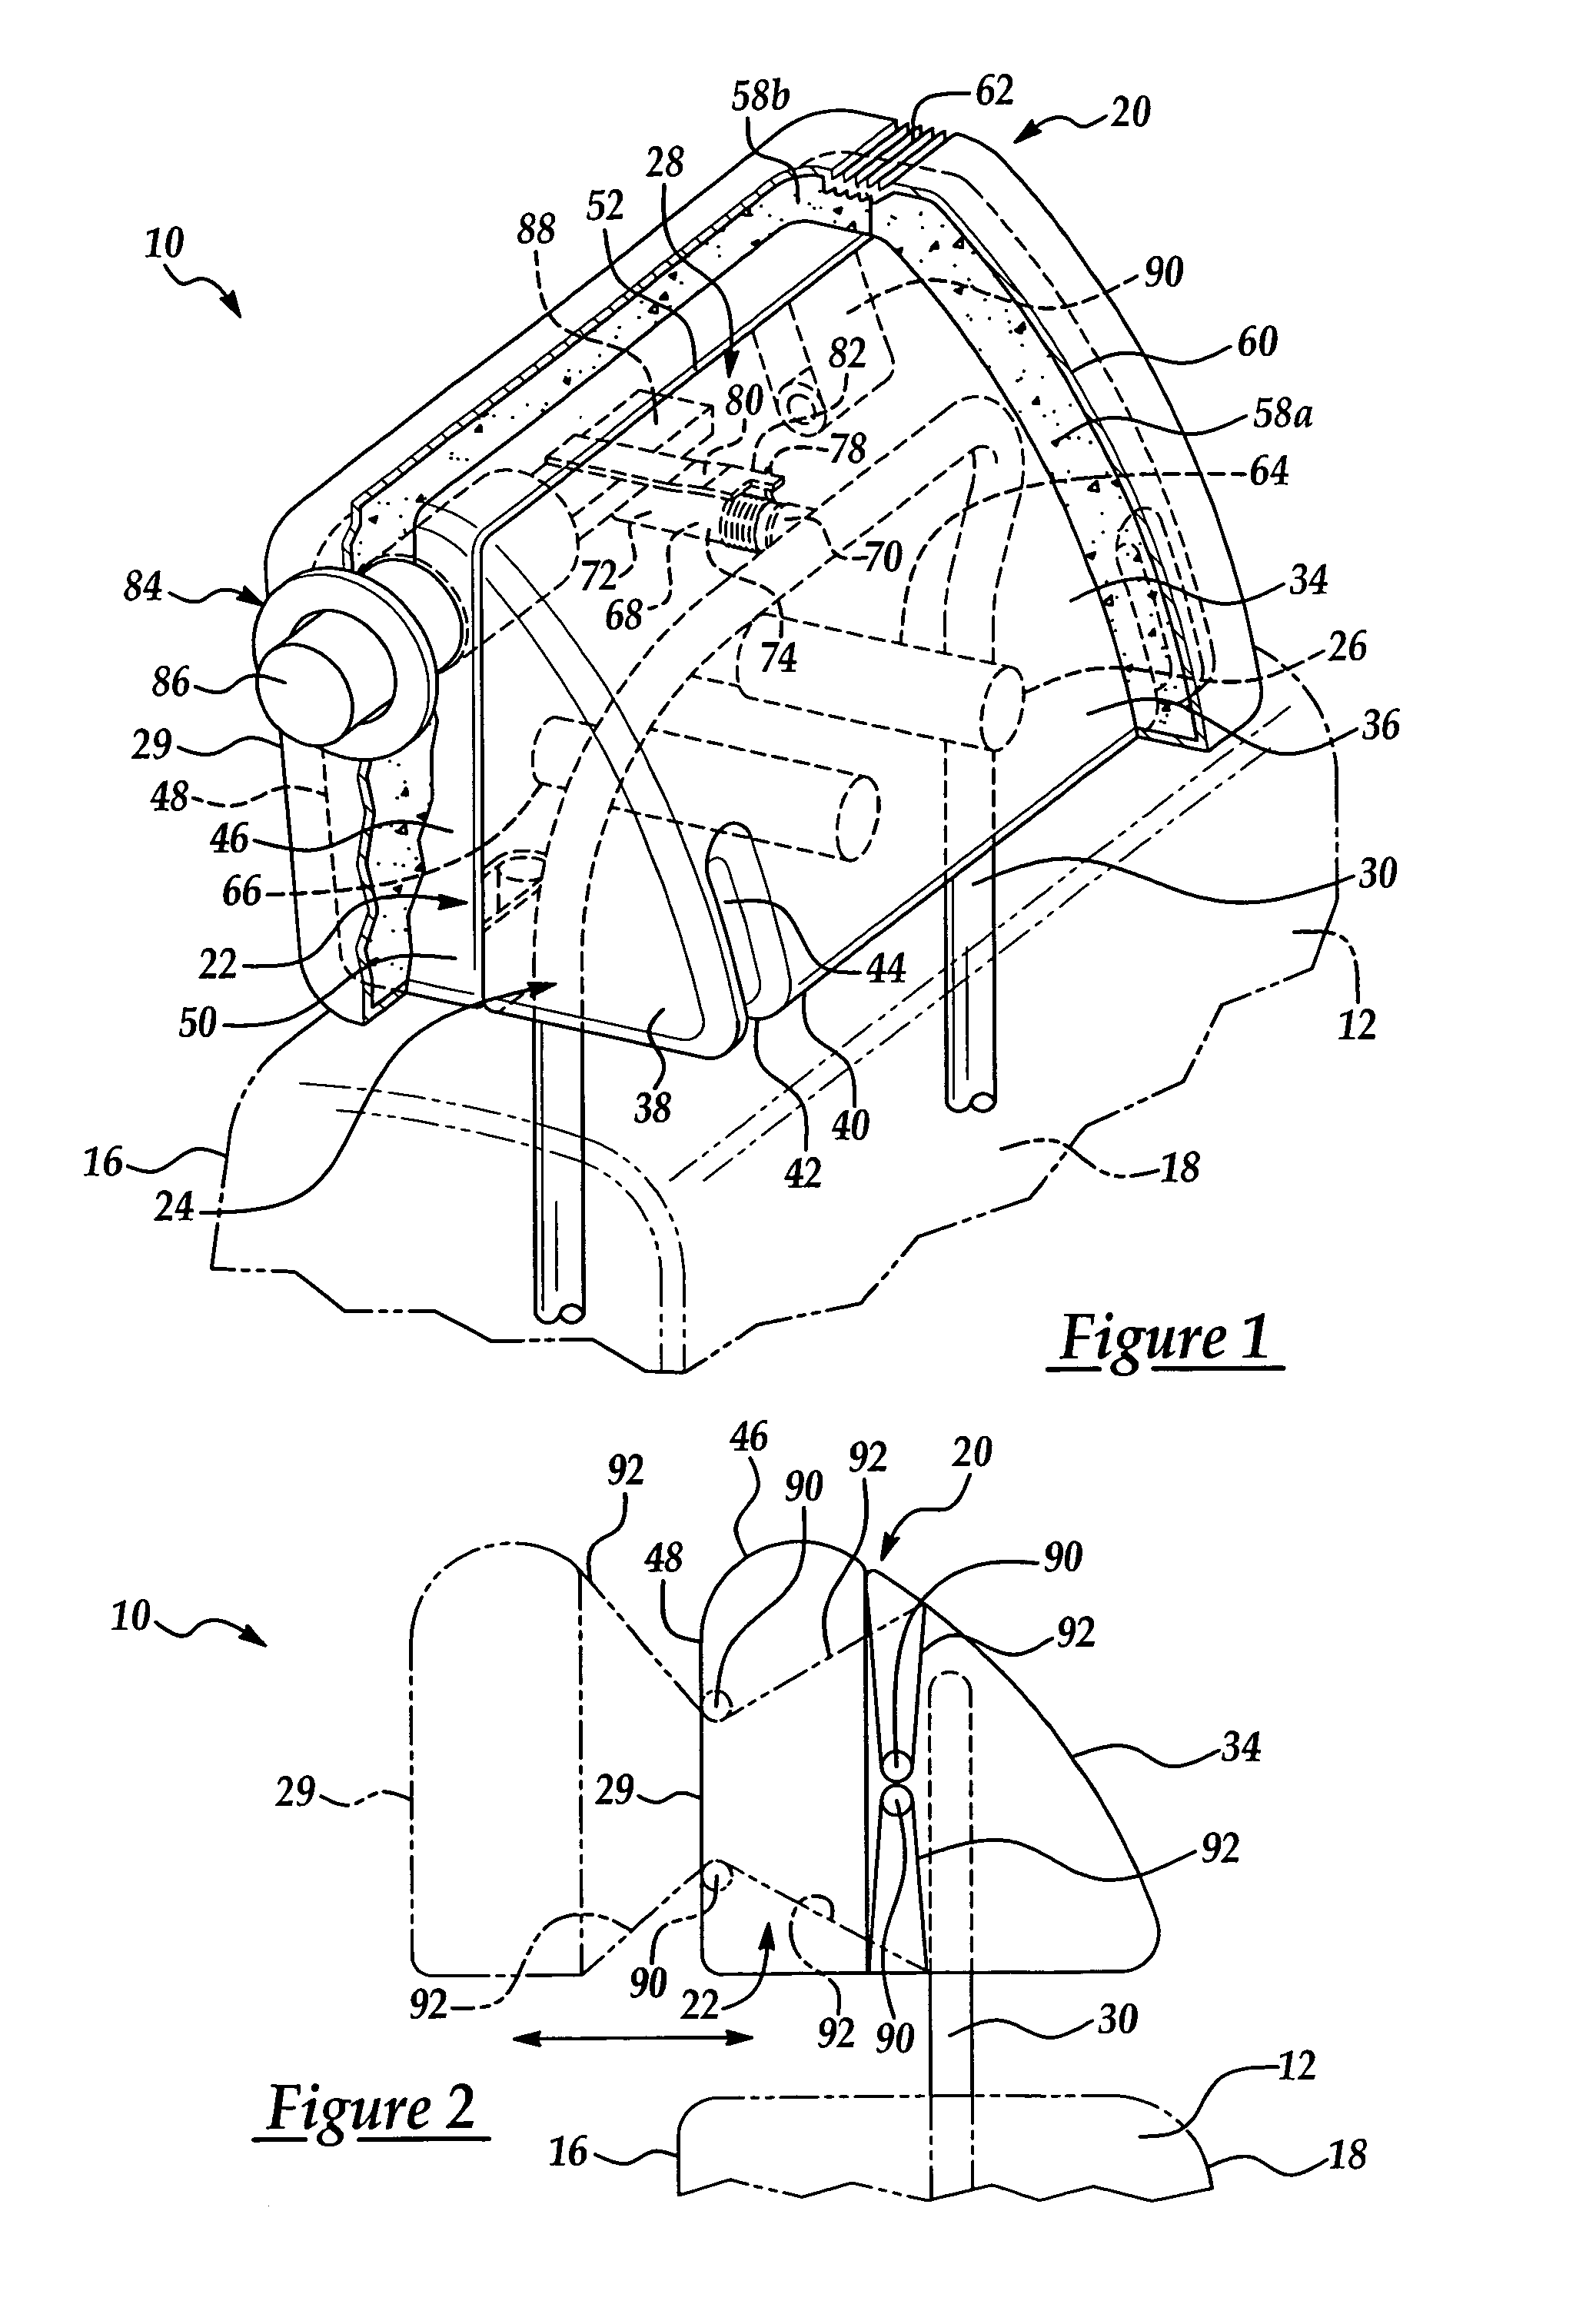 Infinitely adjustable head restraint assembly for a vehicle seat assembly